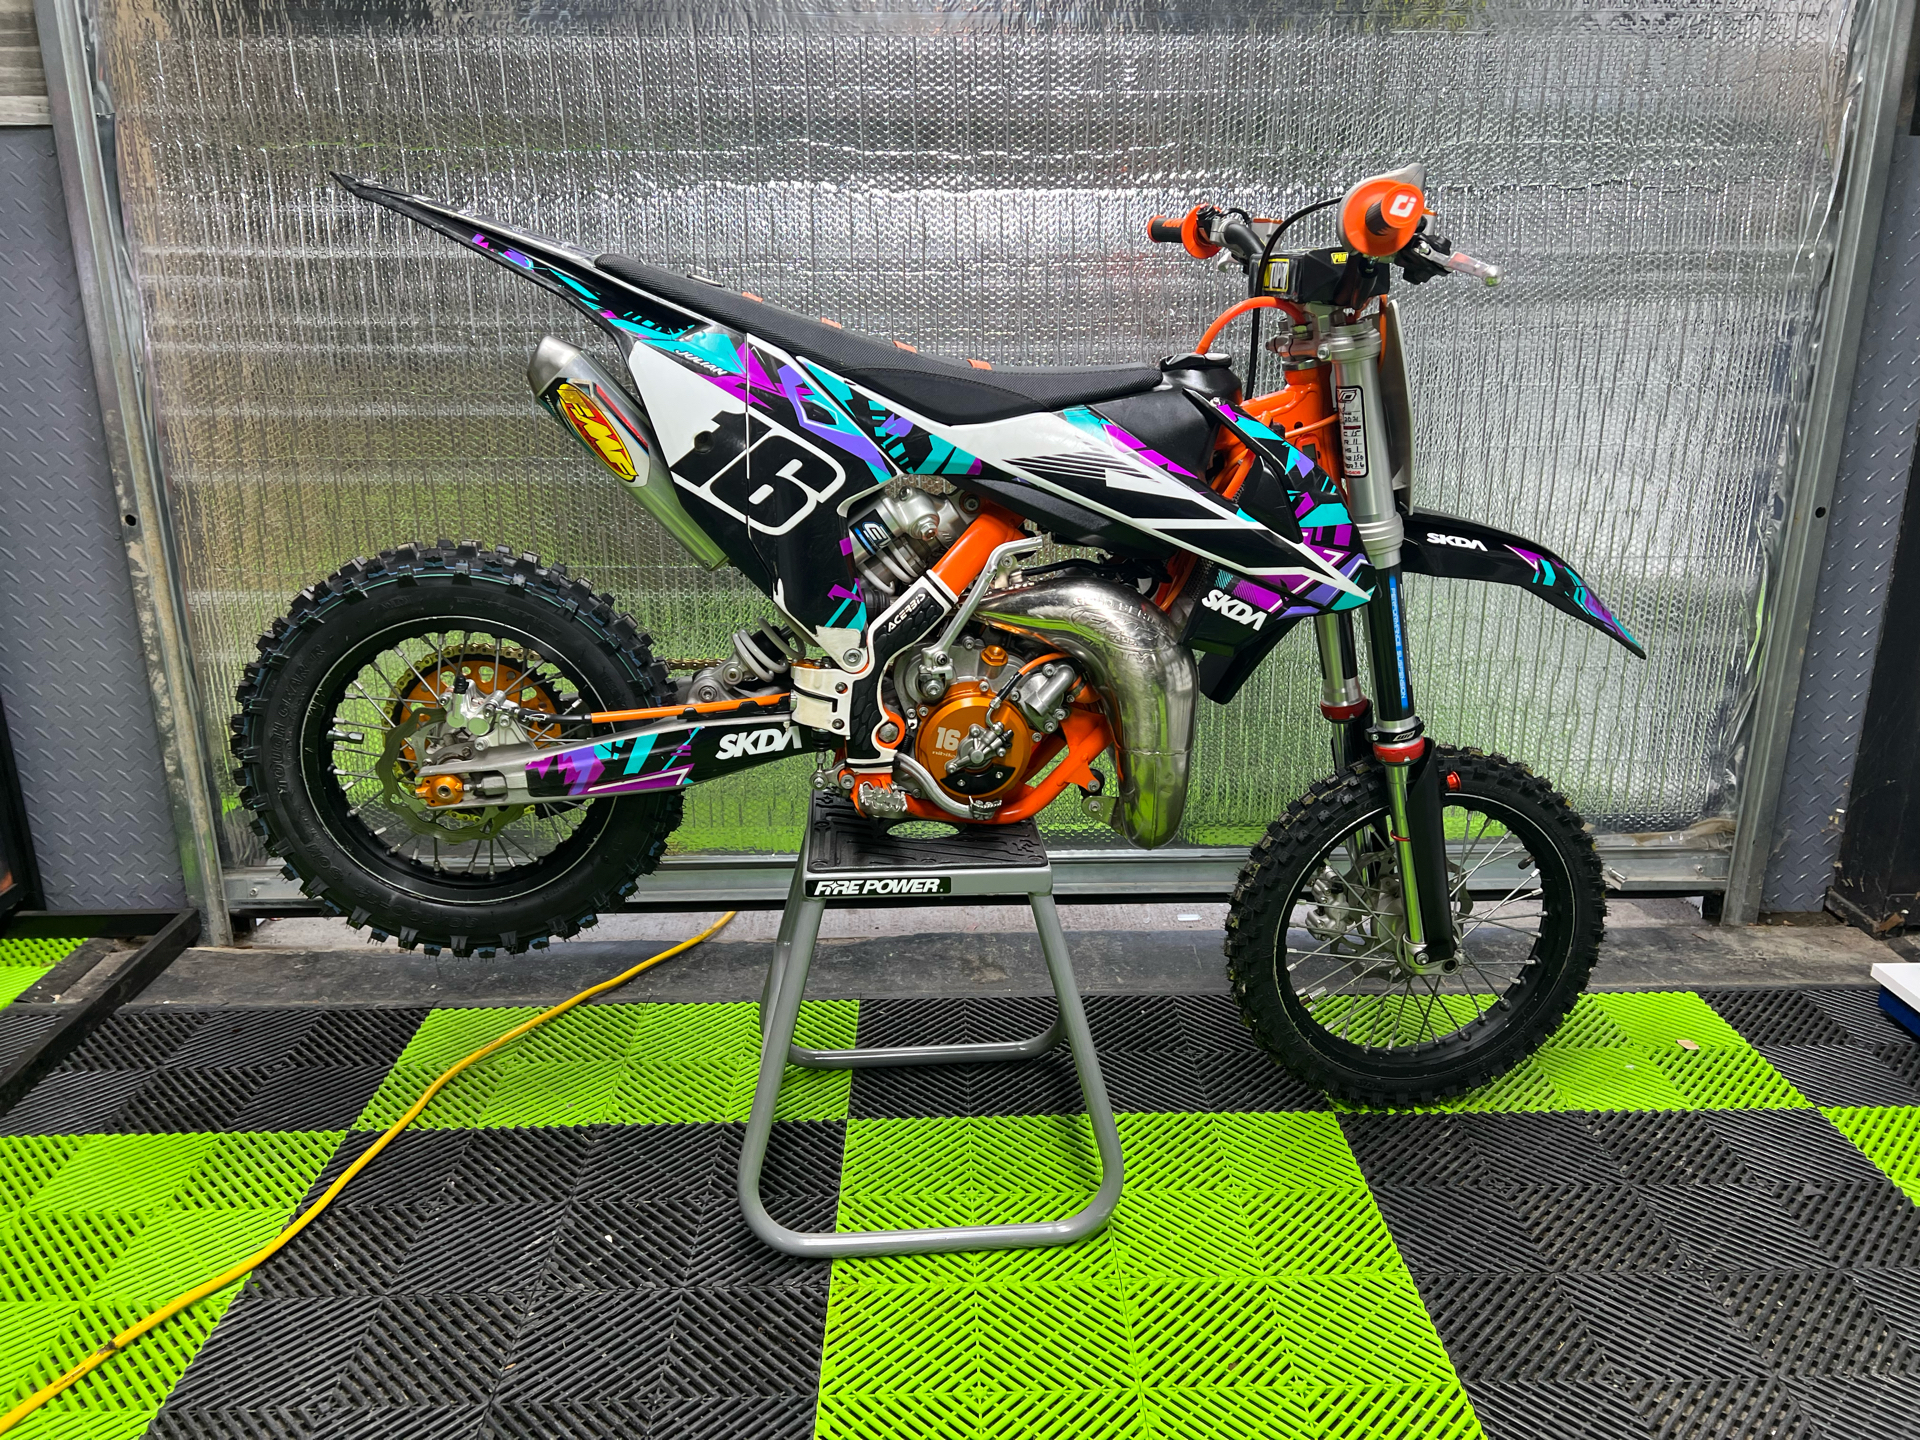 2021 KTM 65 SX in Newfield, New Jersey - Photo 7